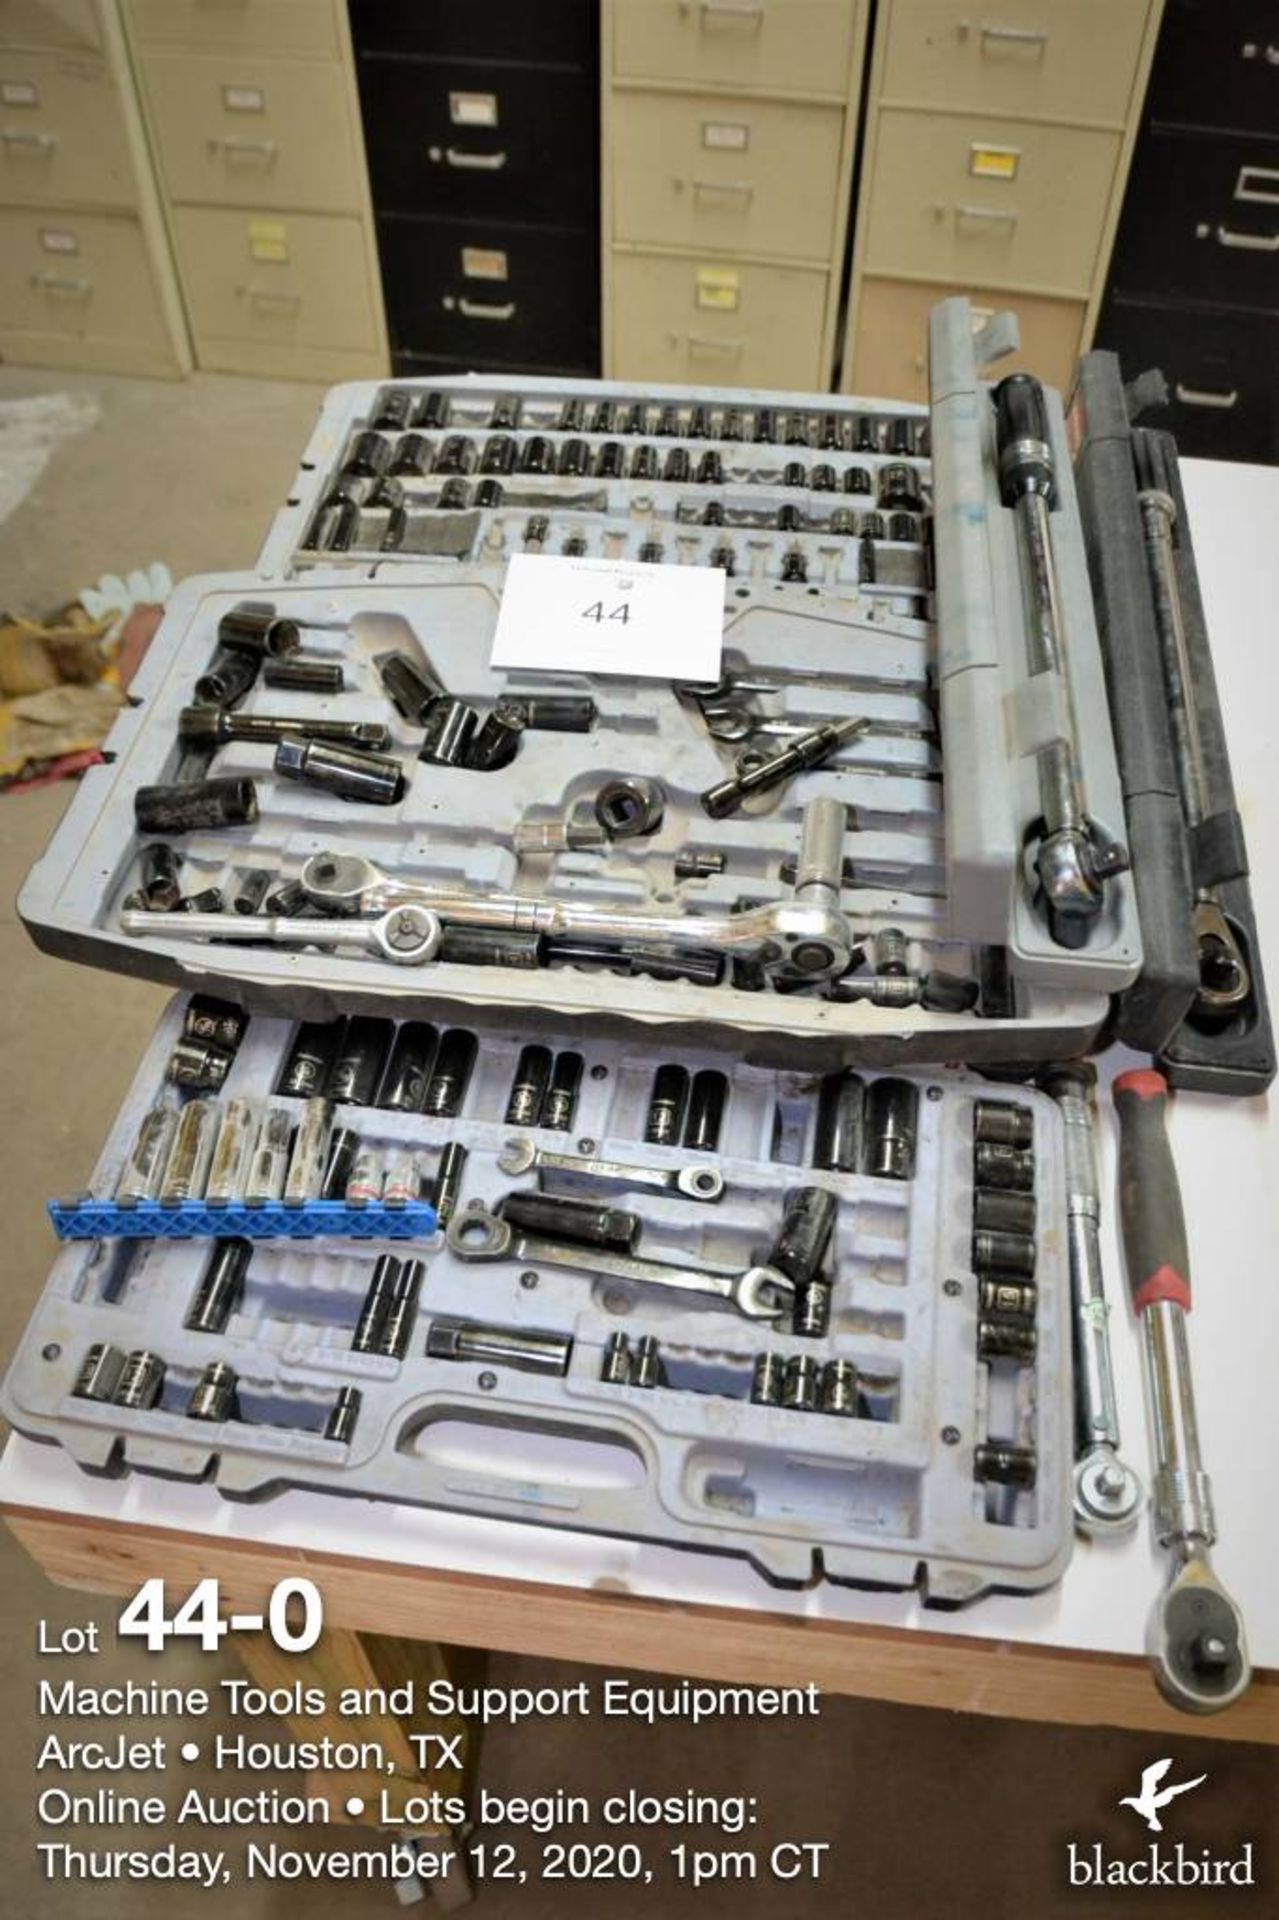 (Lot): Assorted sockets metric & SAE sized, also 3 torque wrenches 2-1/2 drive, 3/8 in & 1/4 in driv